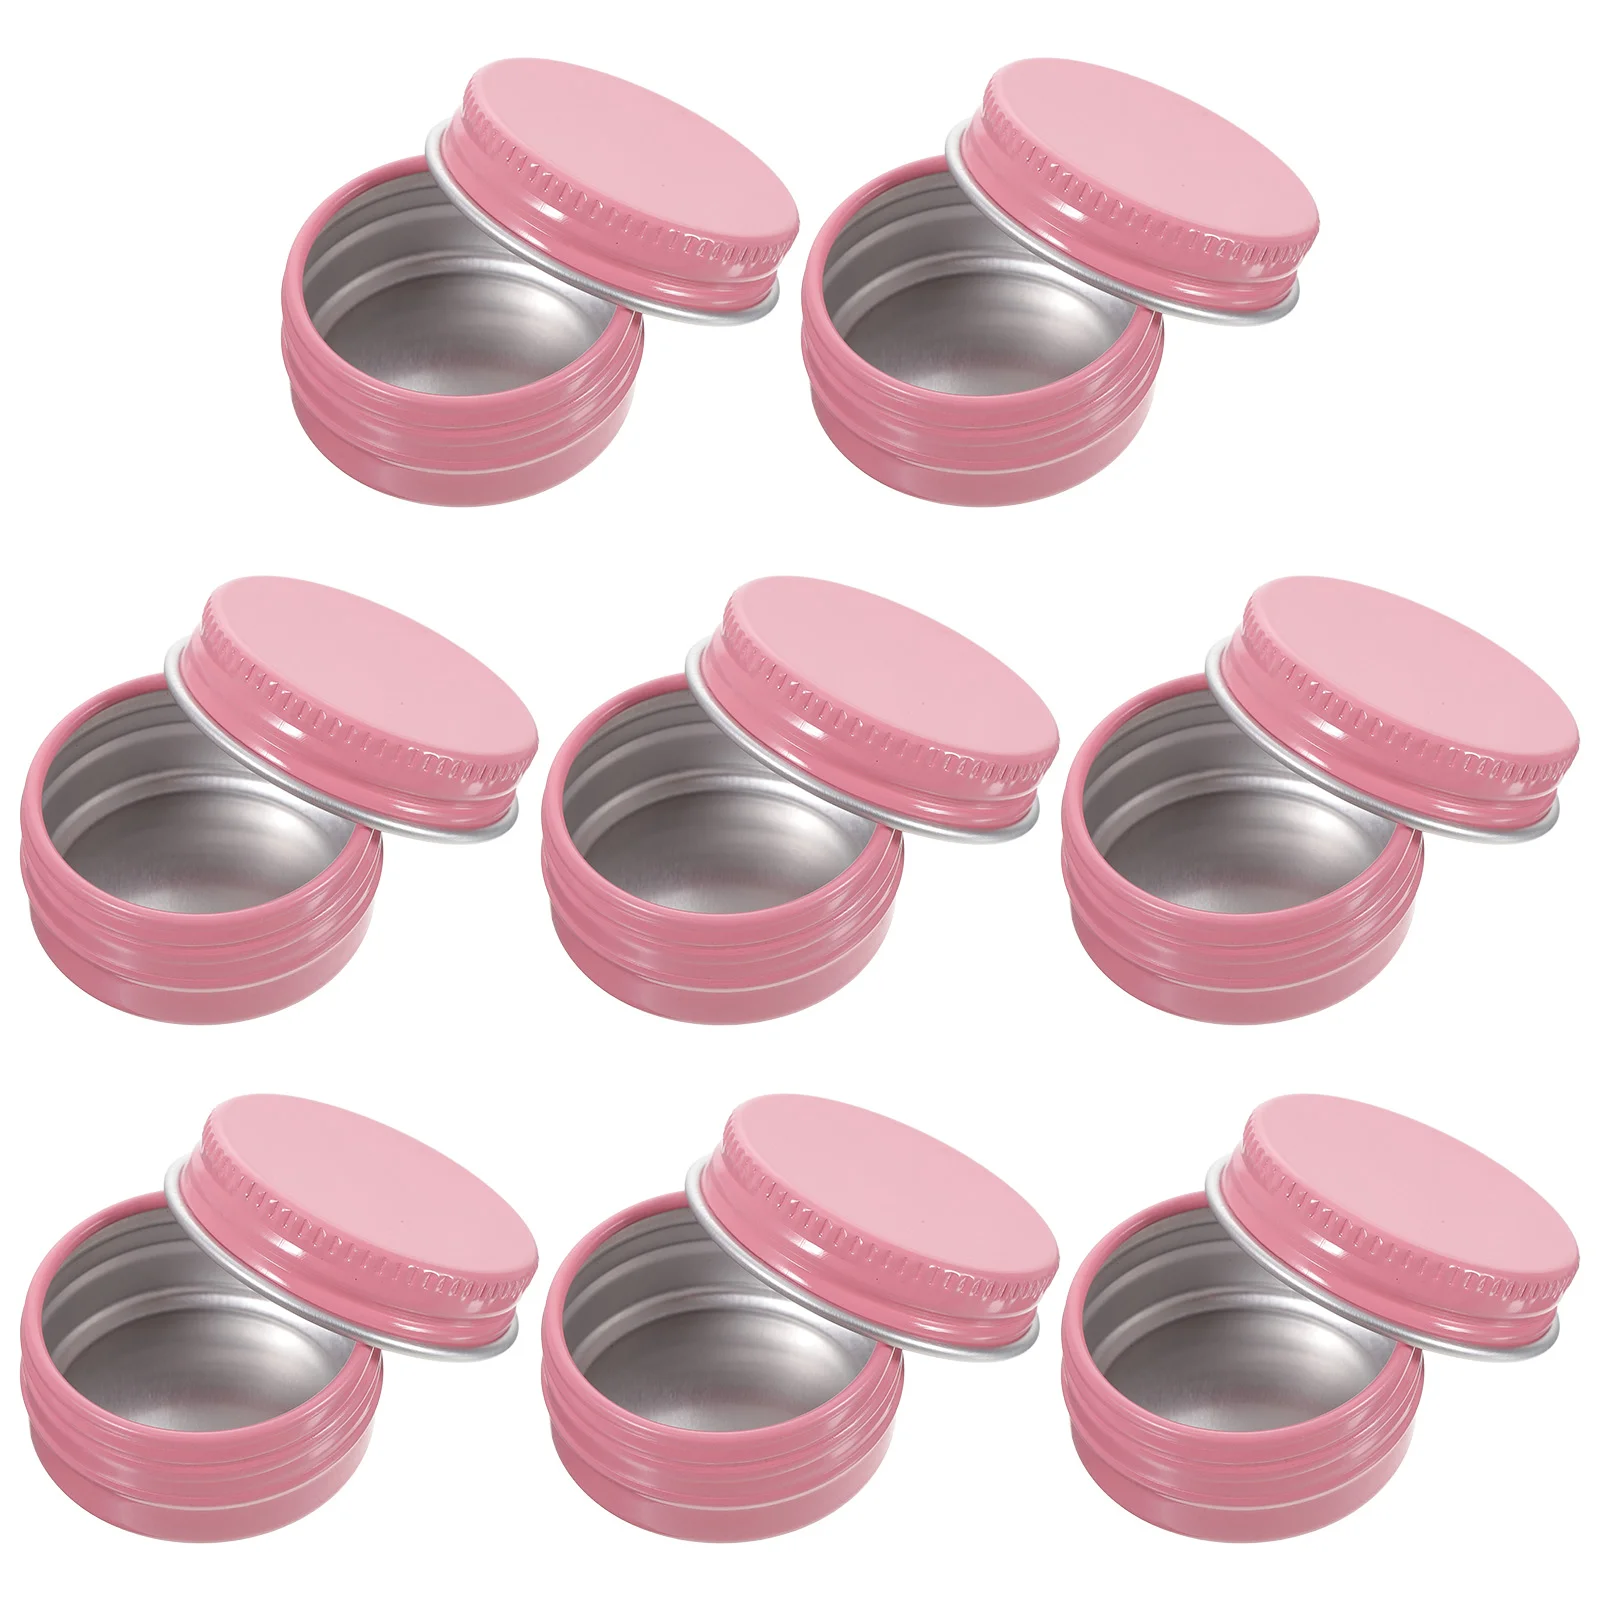 

8pcs Empty Round Boxes Lip Balm Boxes Screw Lid Boxes Sample Containers